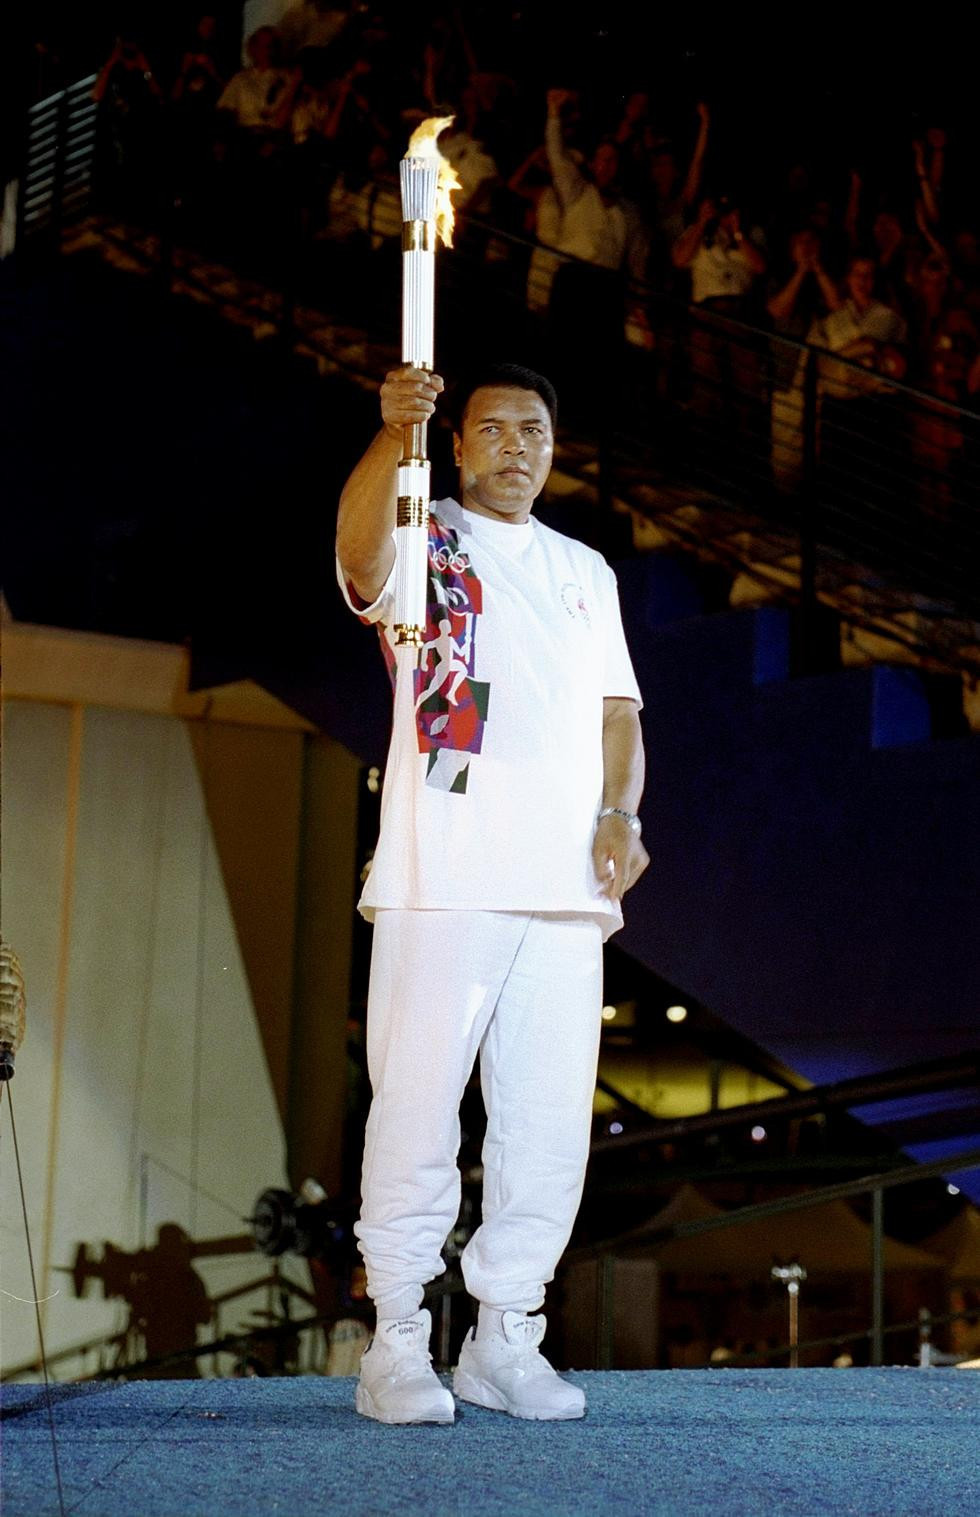 The lighting of the Olympic Cauldron by Muhammad Ali at the Opening Ceremony of the Atlanta 1996 Olympics proved to be one of the event's most iconic moments ©Getty Images